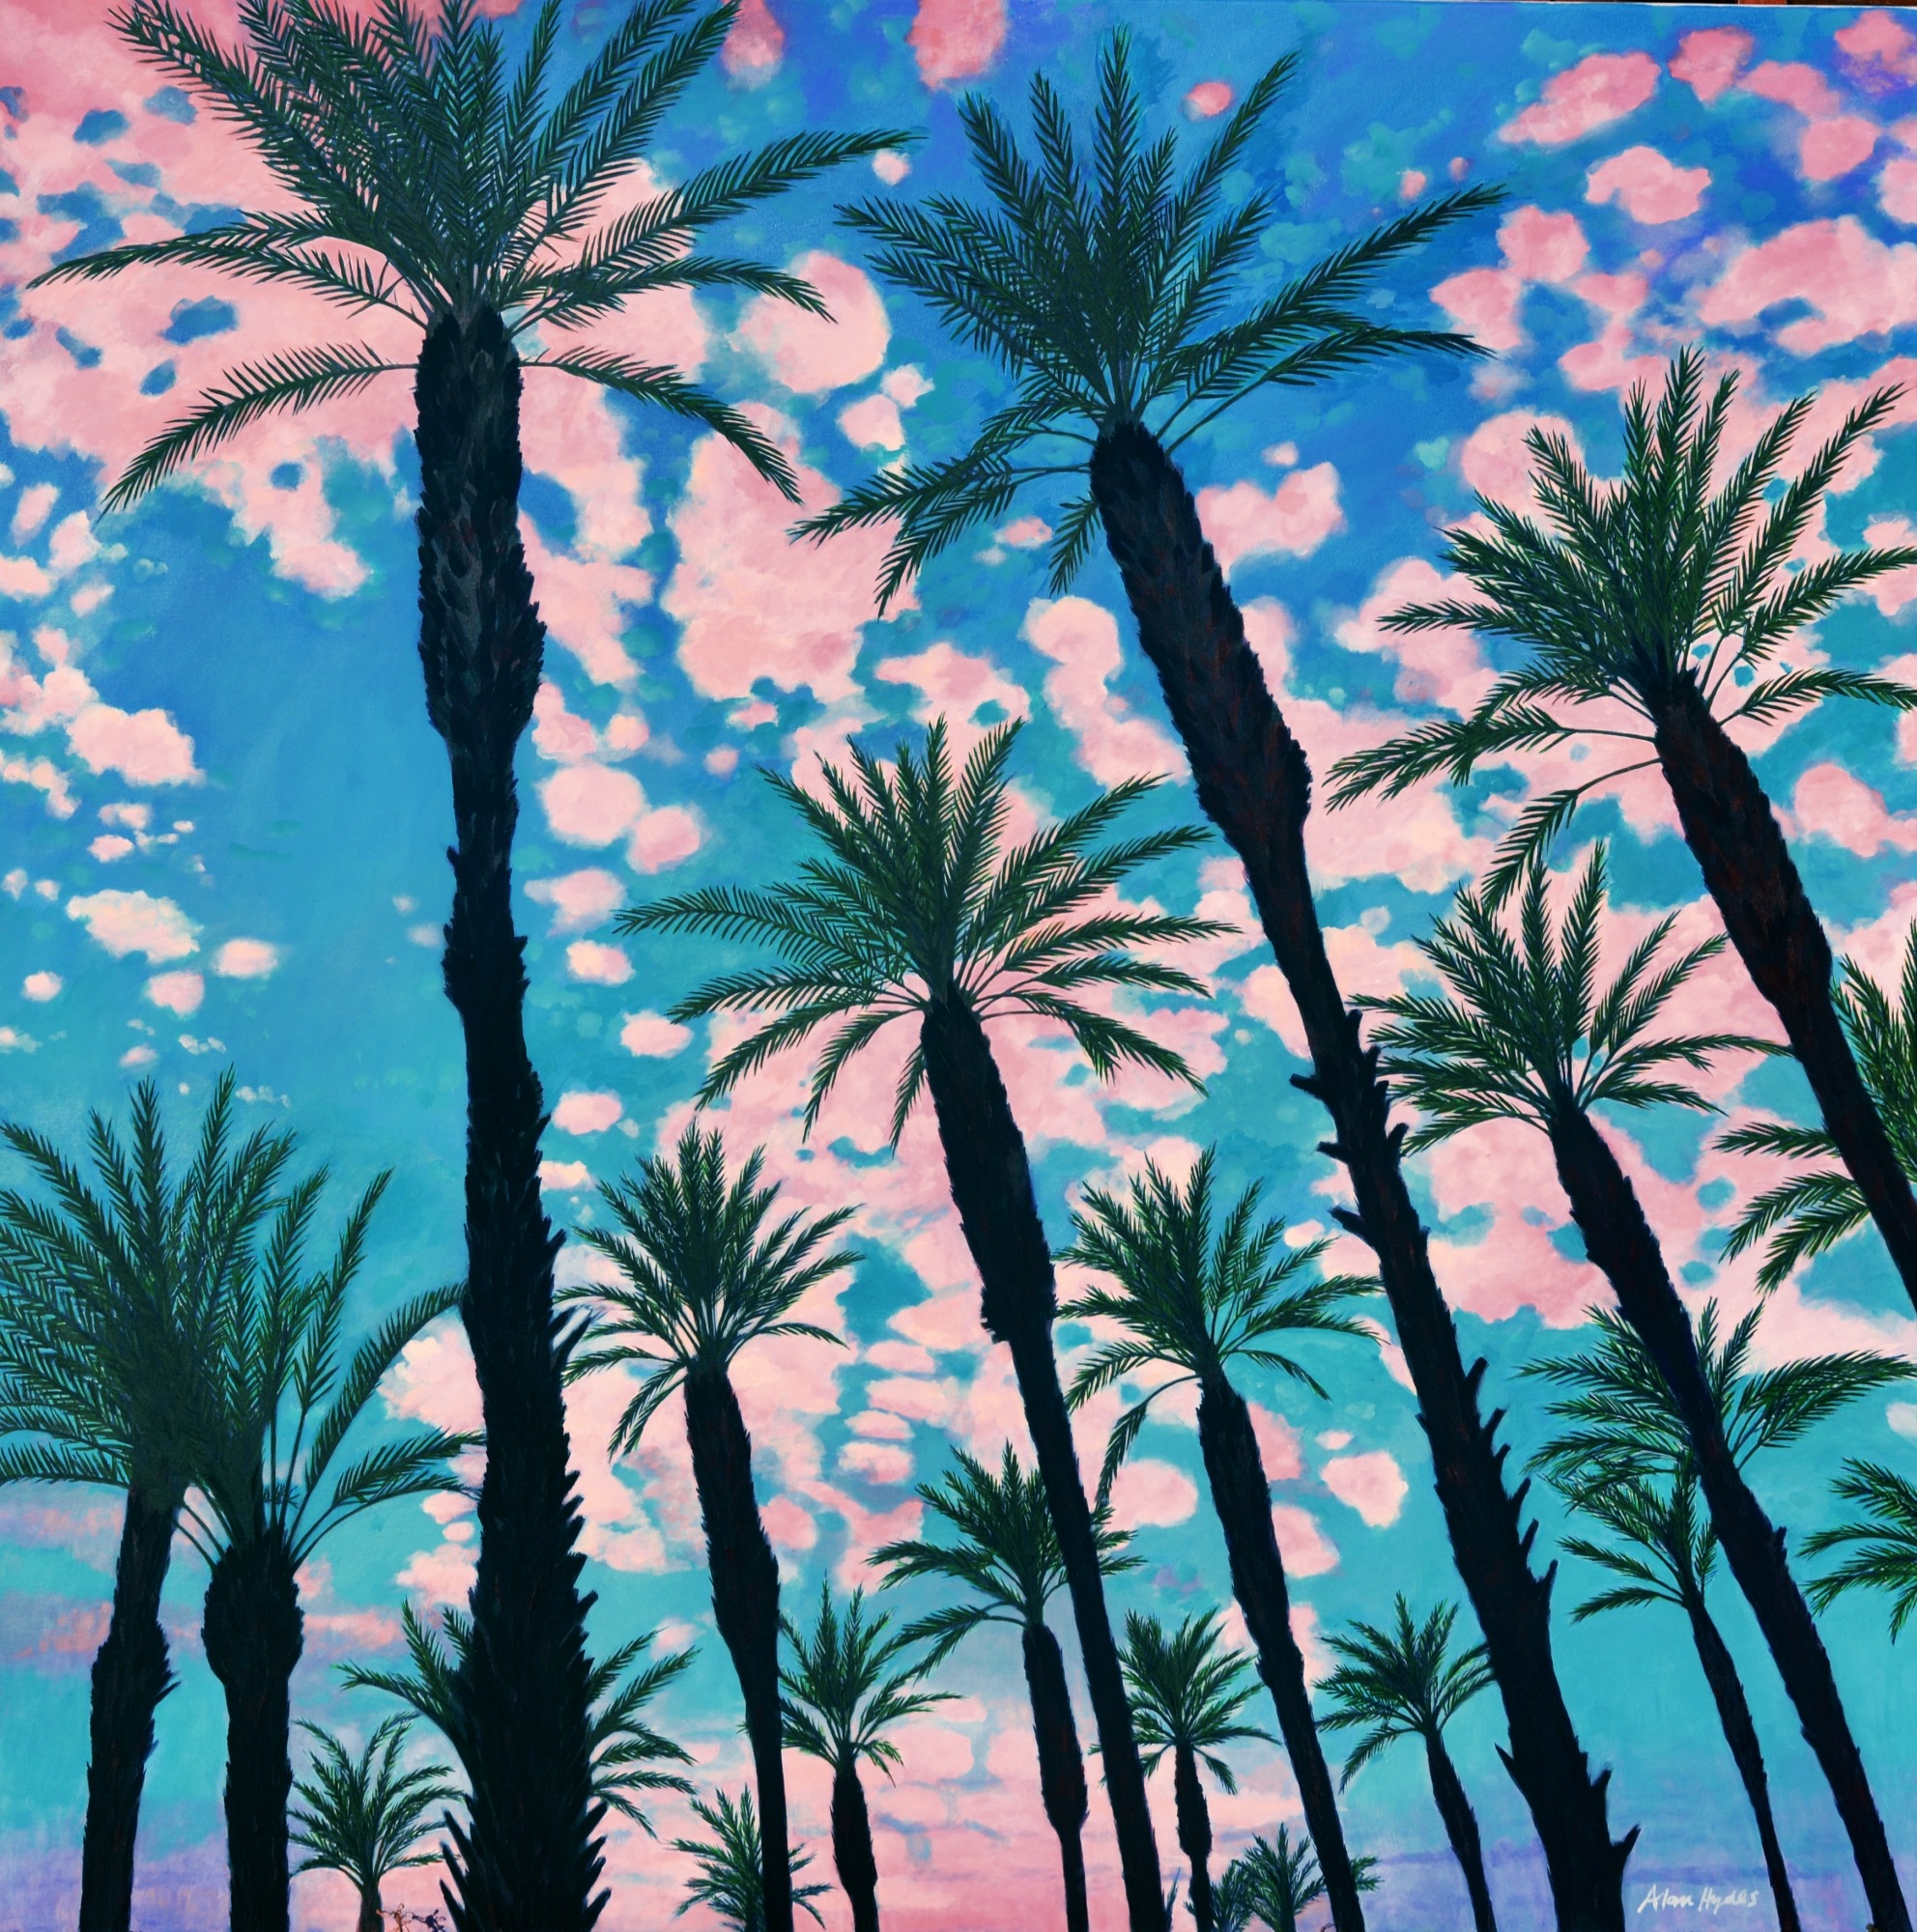 Painting of Palms against a pink and blue sky